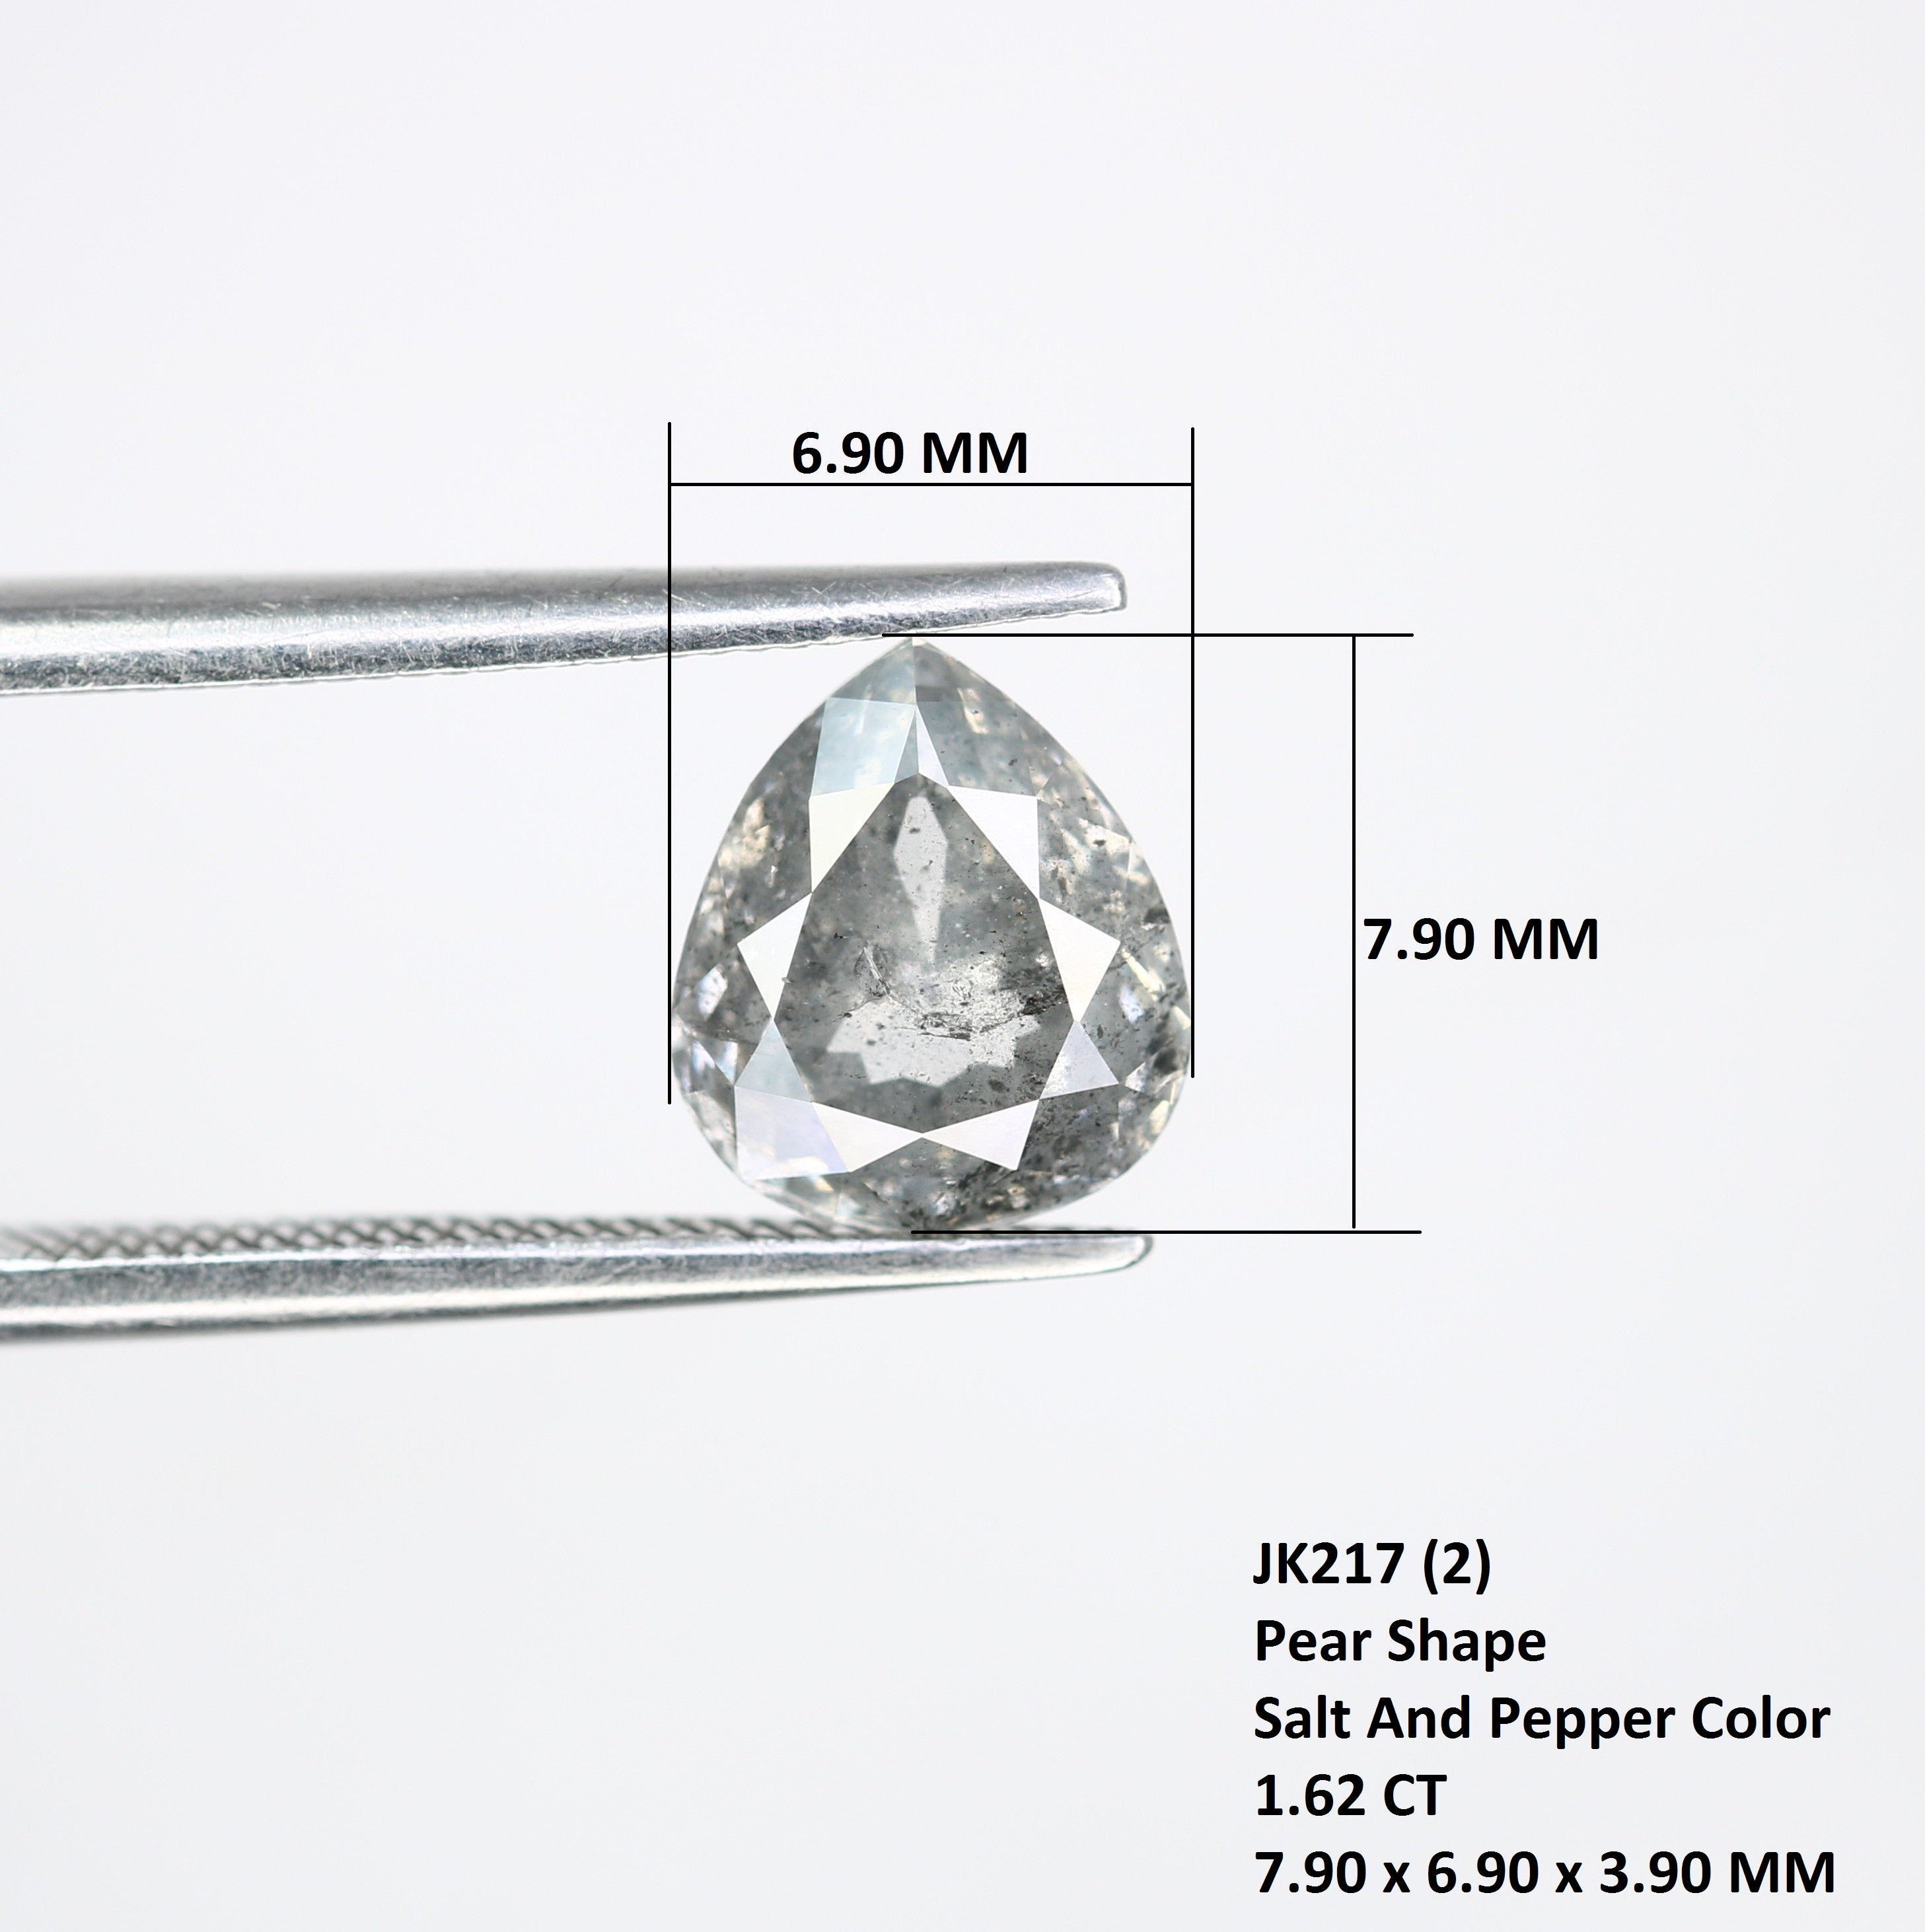 1.62 CT Pear Shape Salt And Pepper Diamond For Engagement Ring